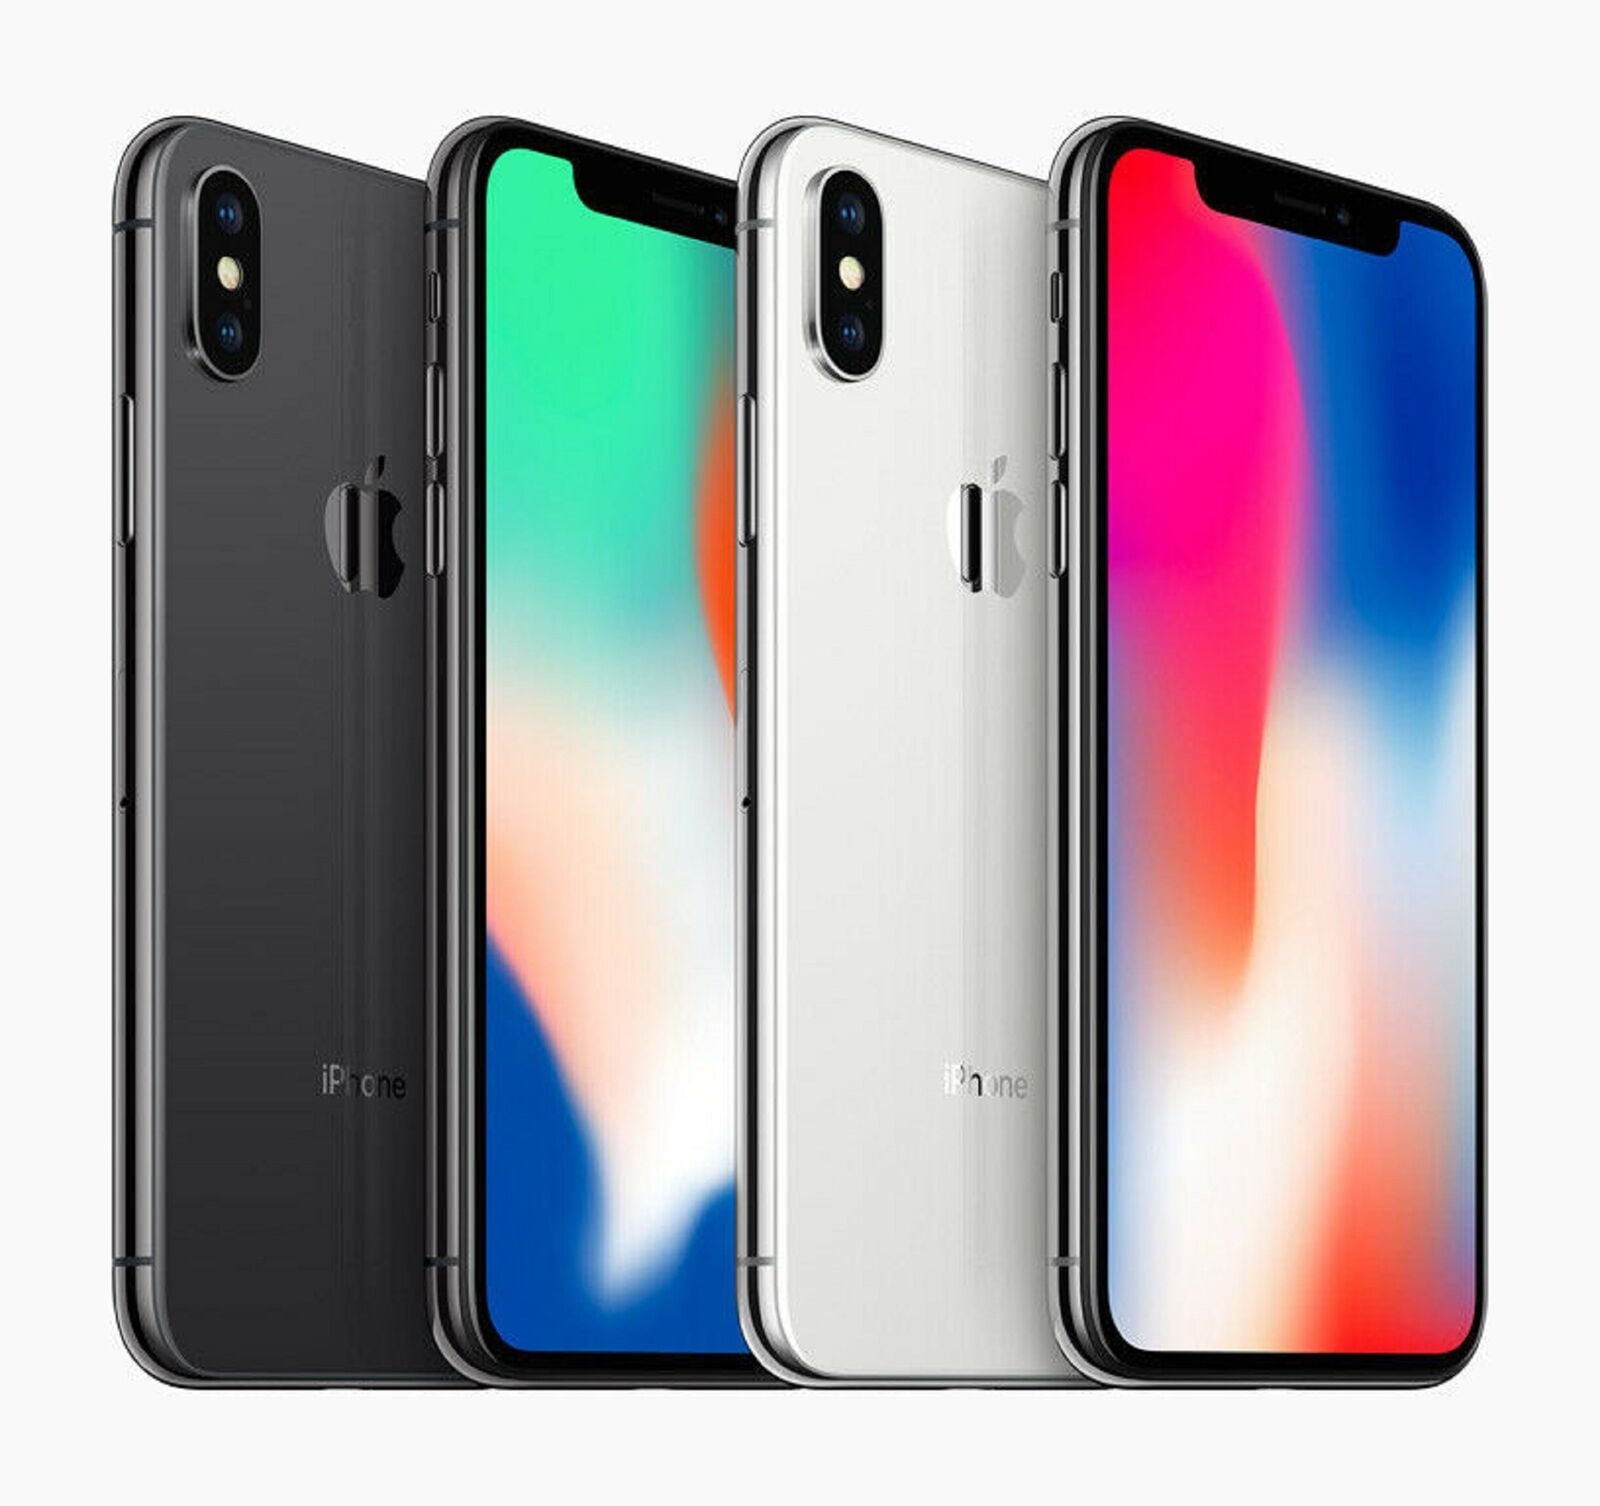 Apple iPhone X 64GB 256GB Unlocked Variants - EXTRA 25% OFF - Excellent AAA+